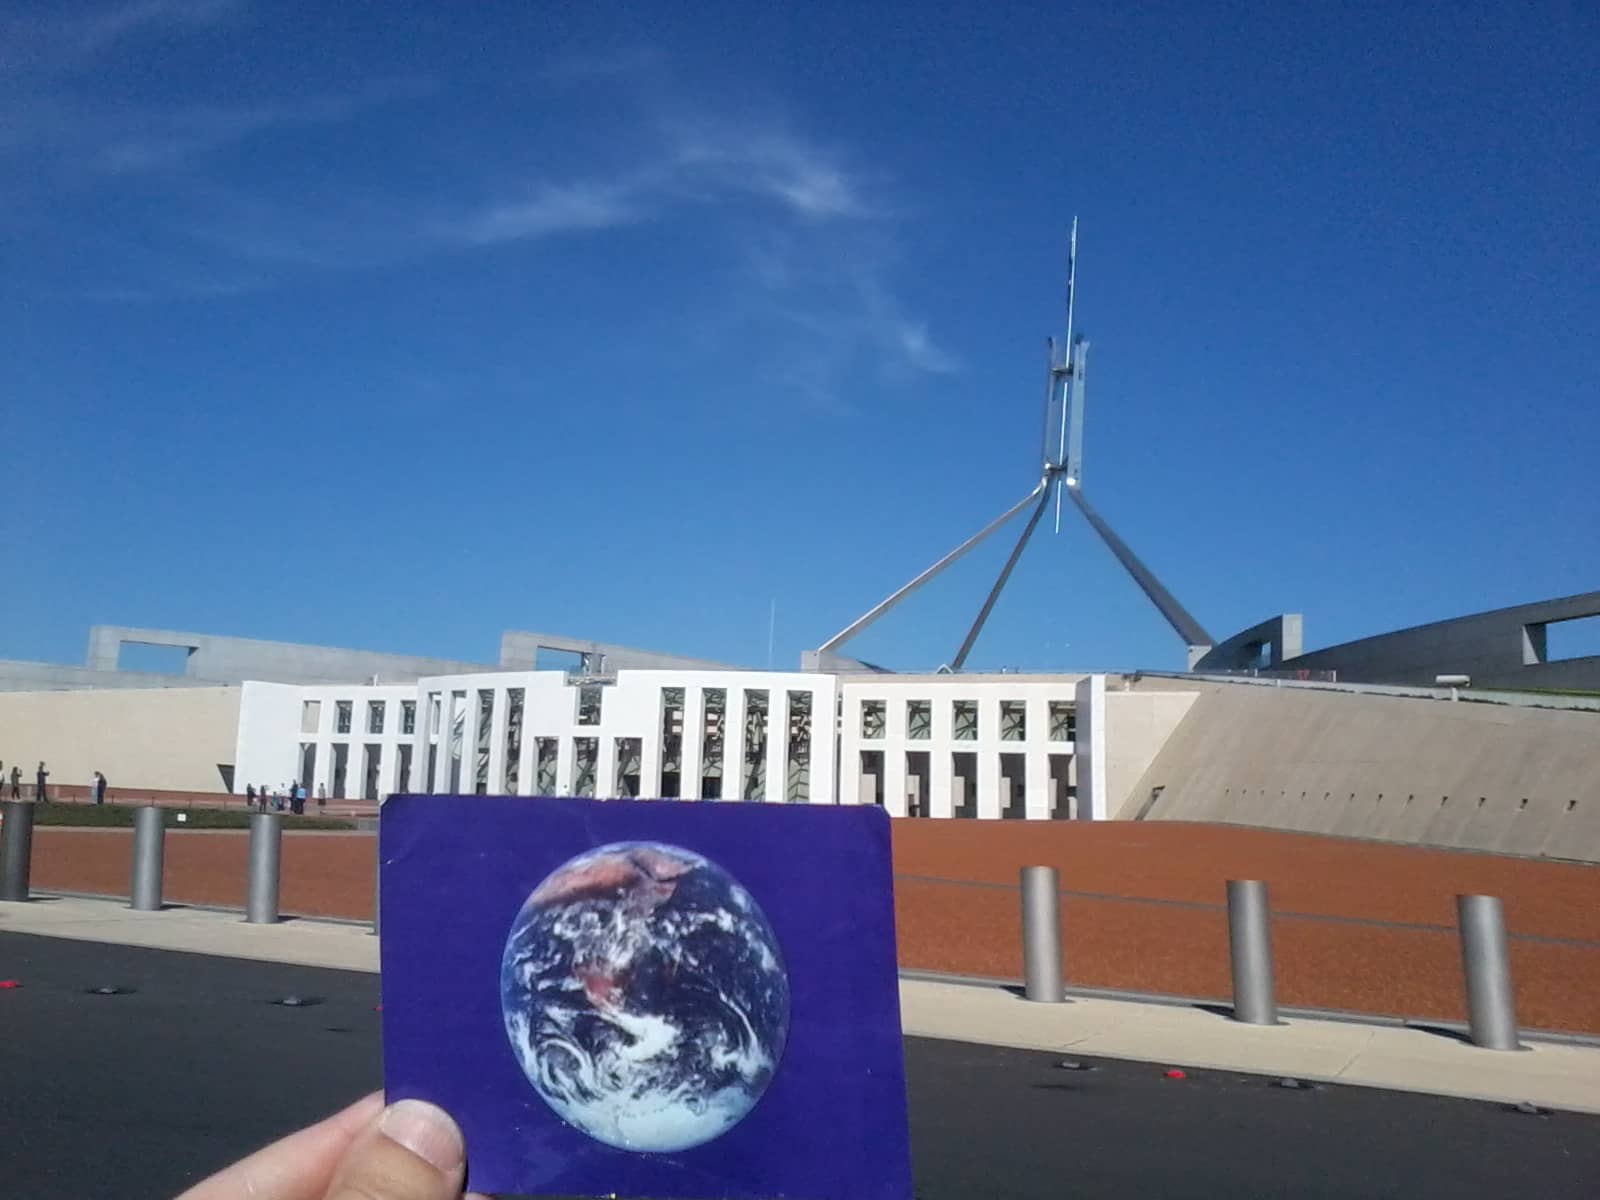 The Parliament House in Canberra, Australia was #EarthFlagged !